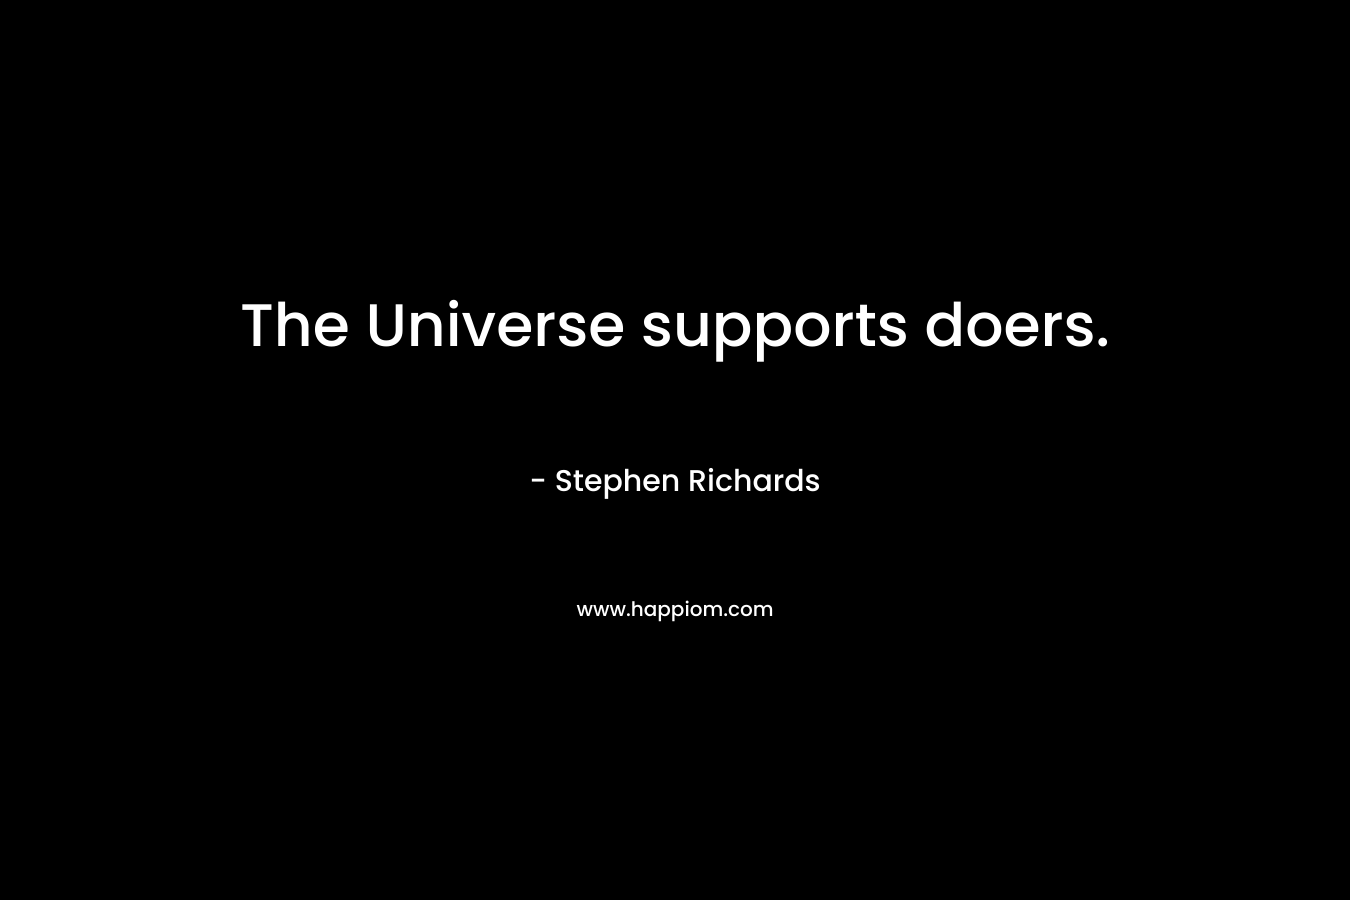 The Universe supports doers.